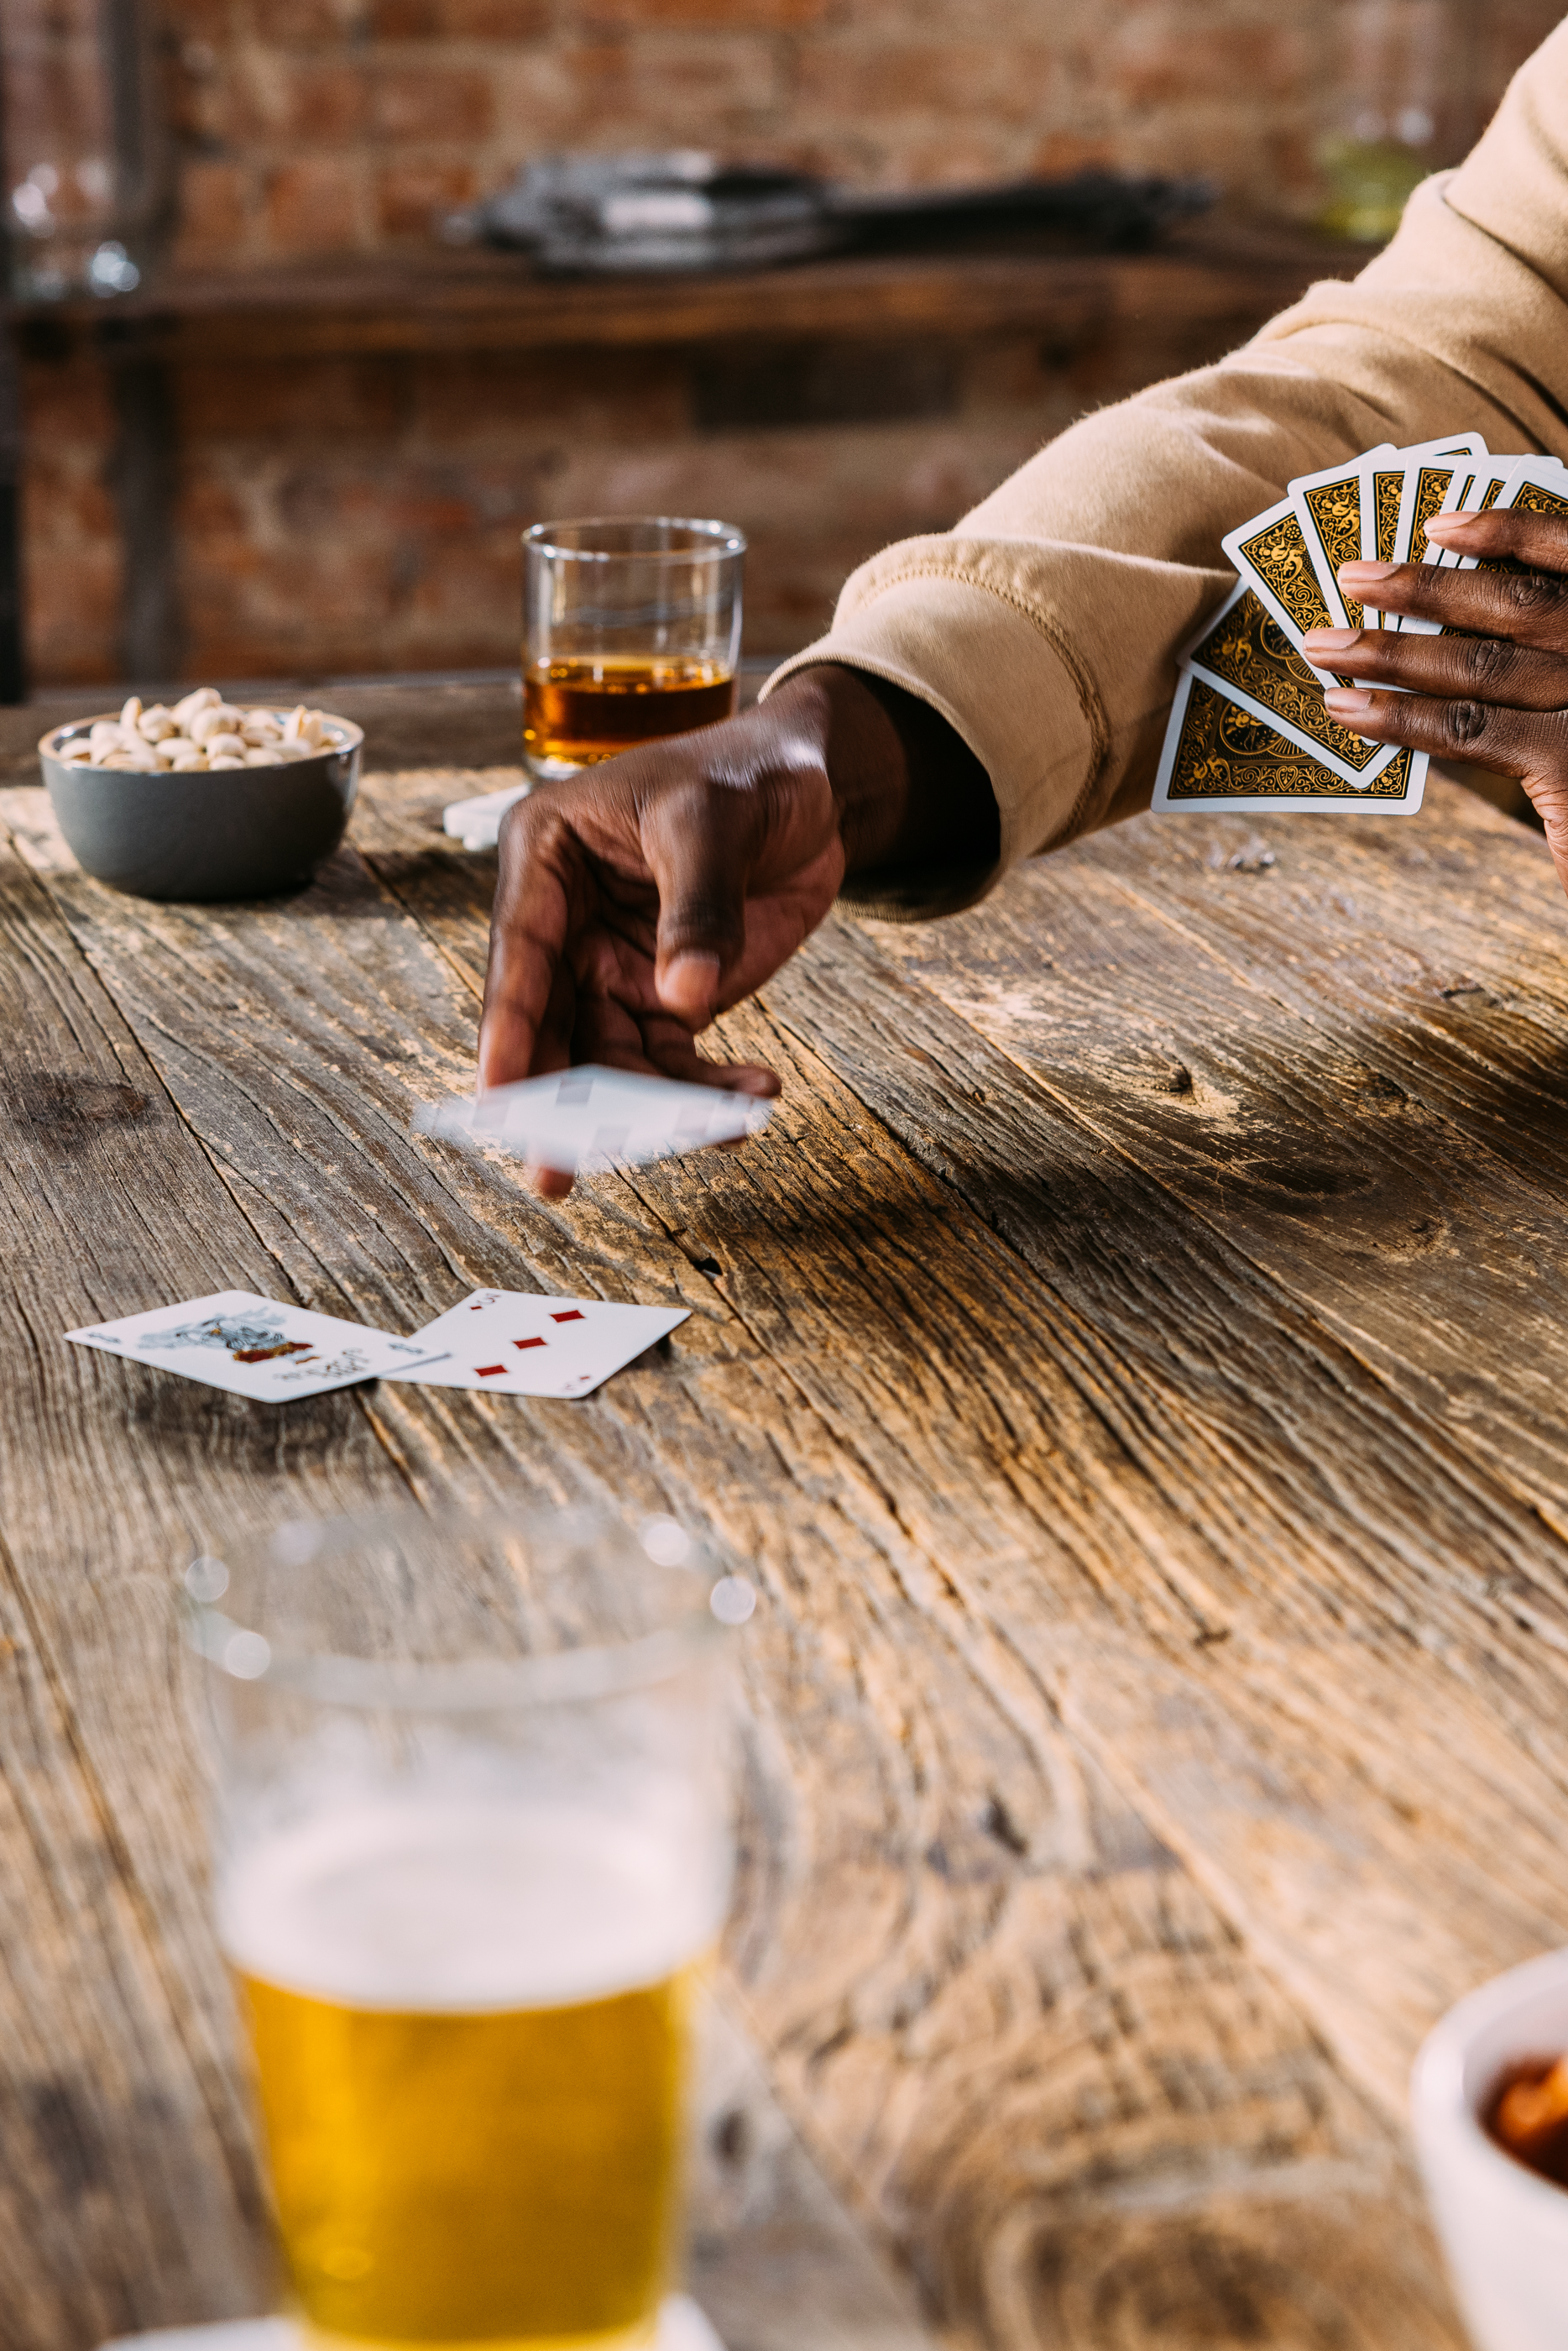 Person throwing down card into play pile on wooden table, with drinks and snacks around.